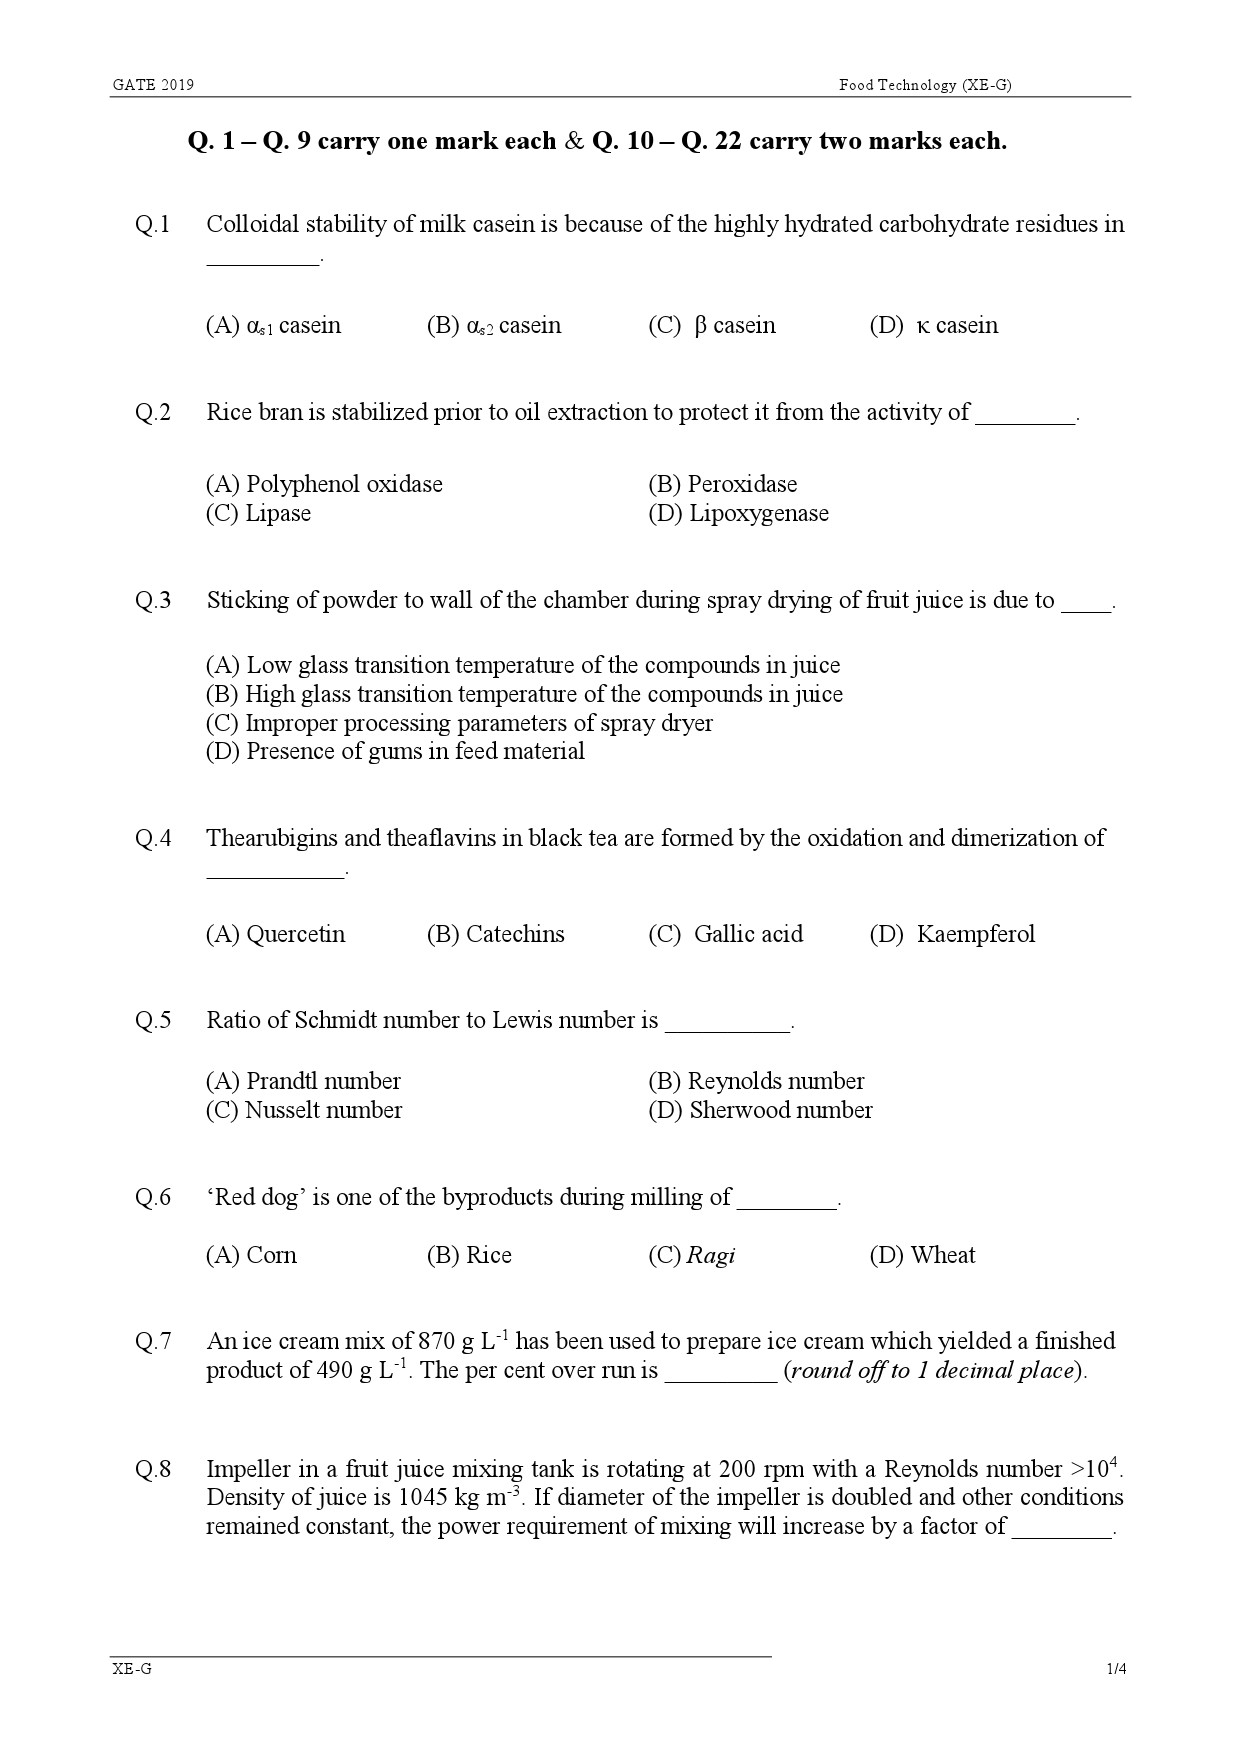 GATE Exam Question Paper 2019 Engineering Sciences 32